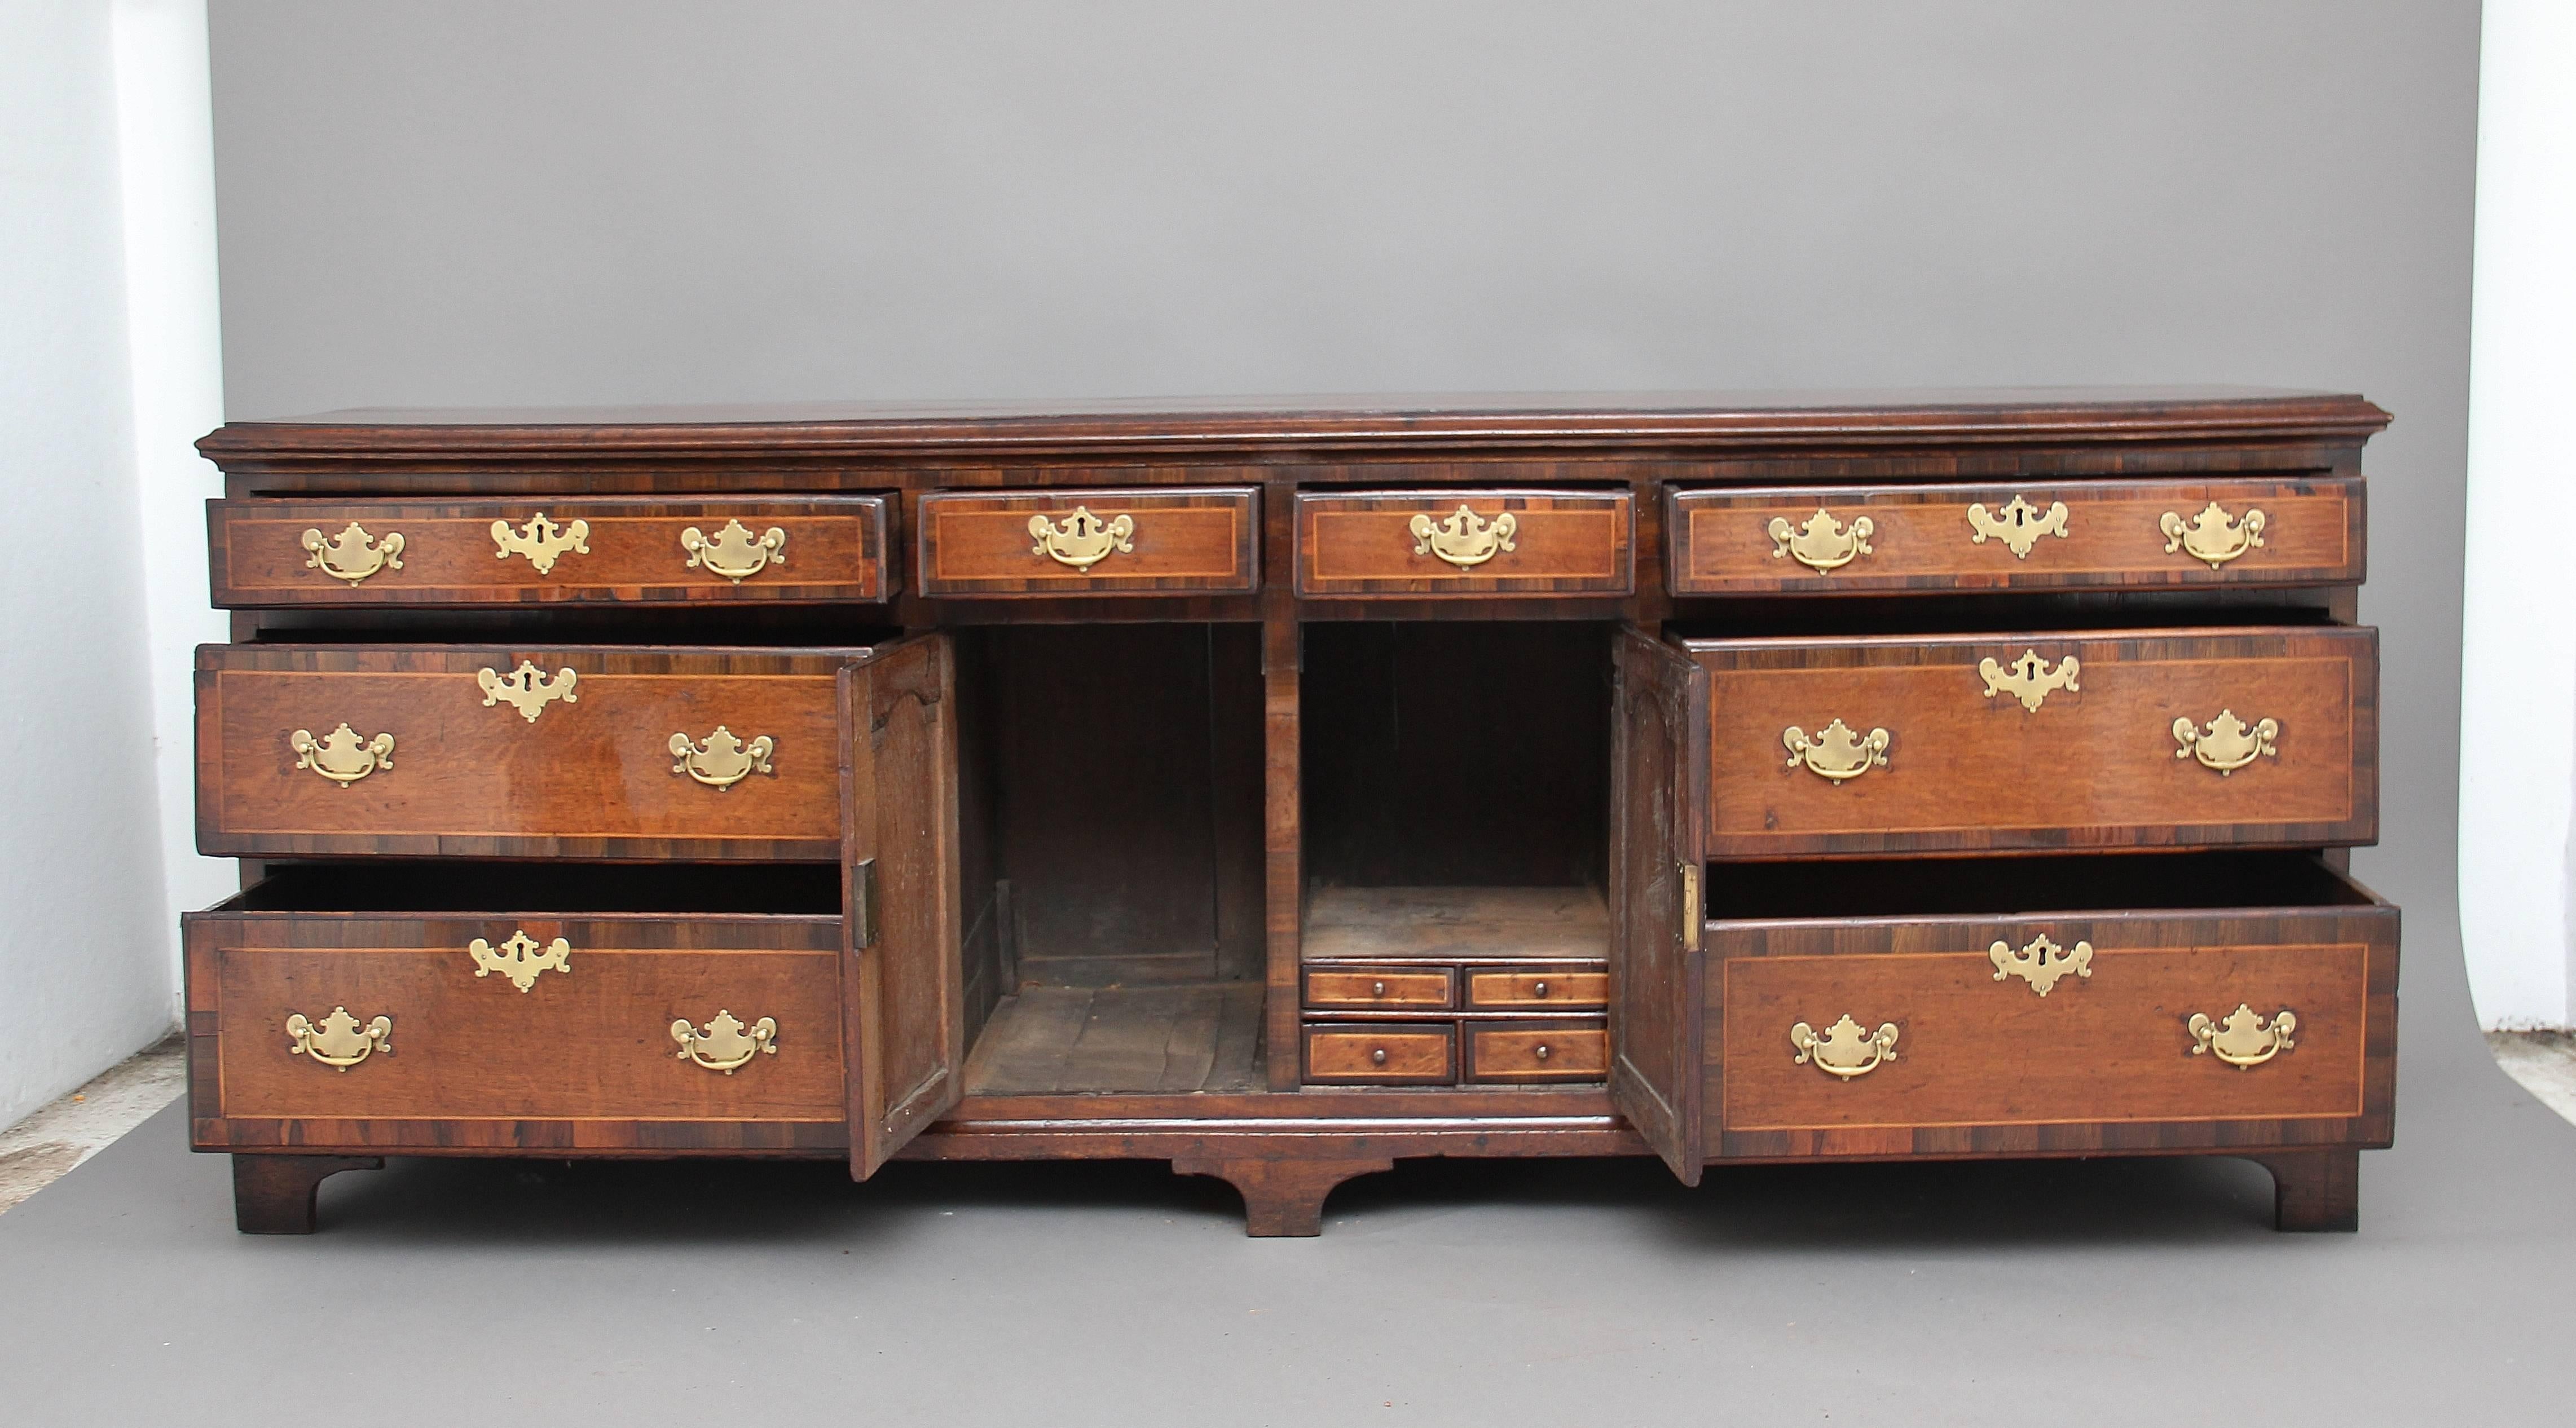 18th Century oak dresser base, the top cross banded in walnut with a thumb moulded edge above a selection of eight drawers, two small drawers at the top flanked either side by three graduated drawers, all drawers are cross banded in walnut and oak